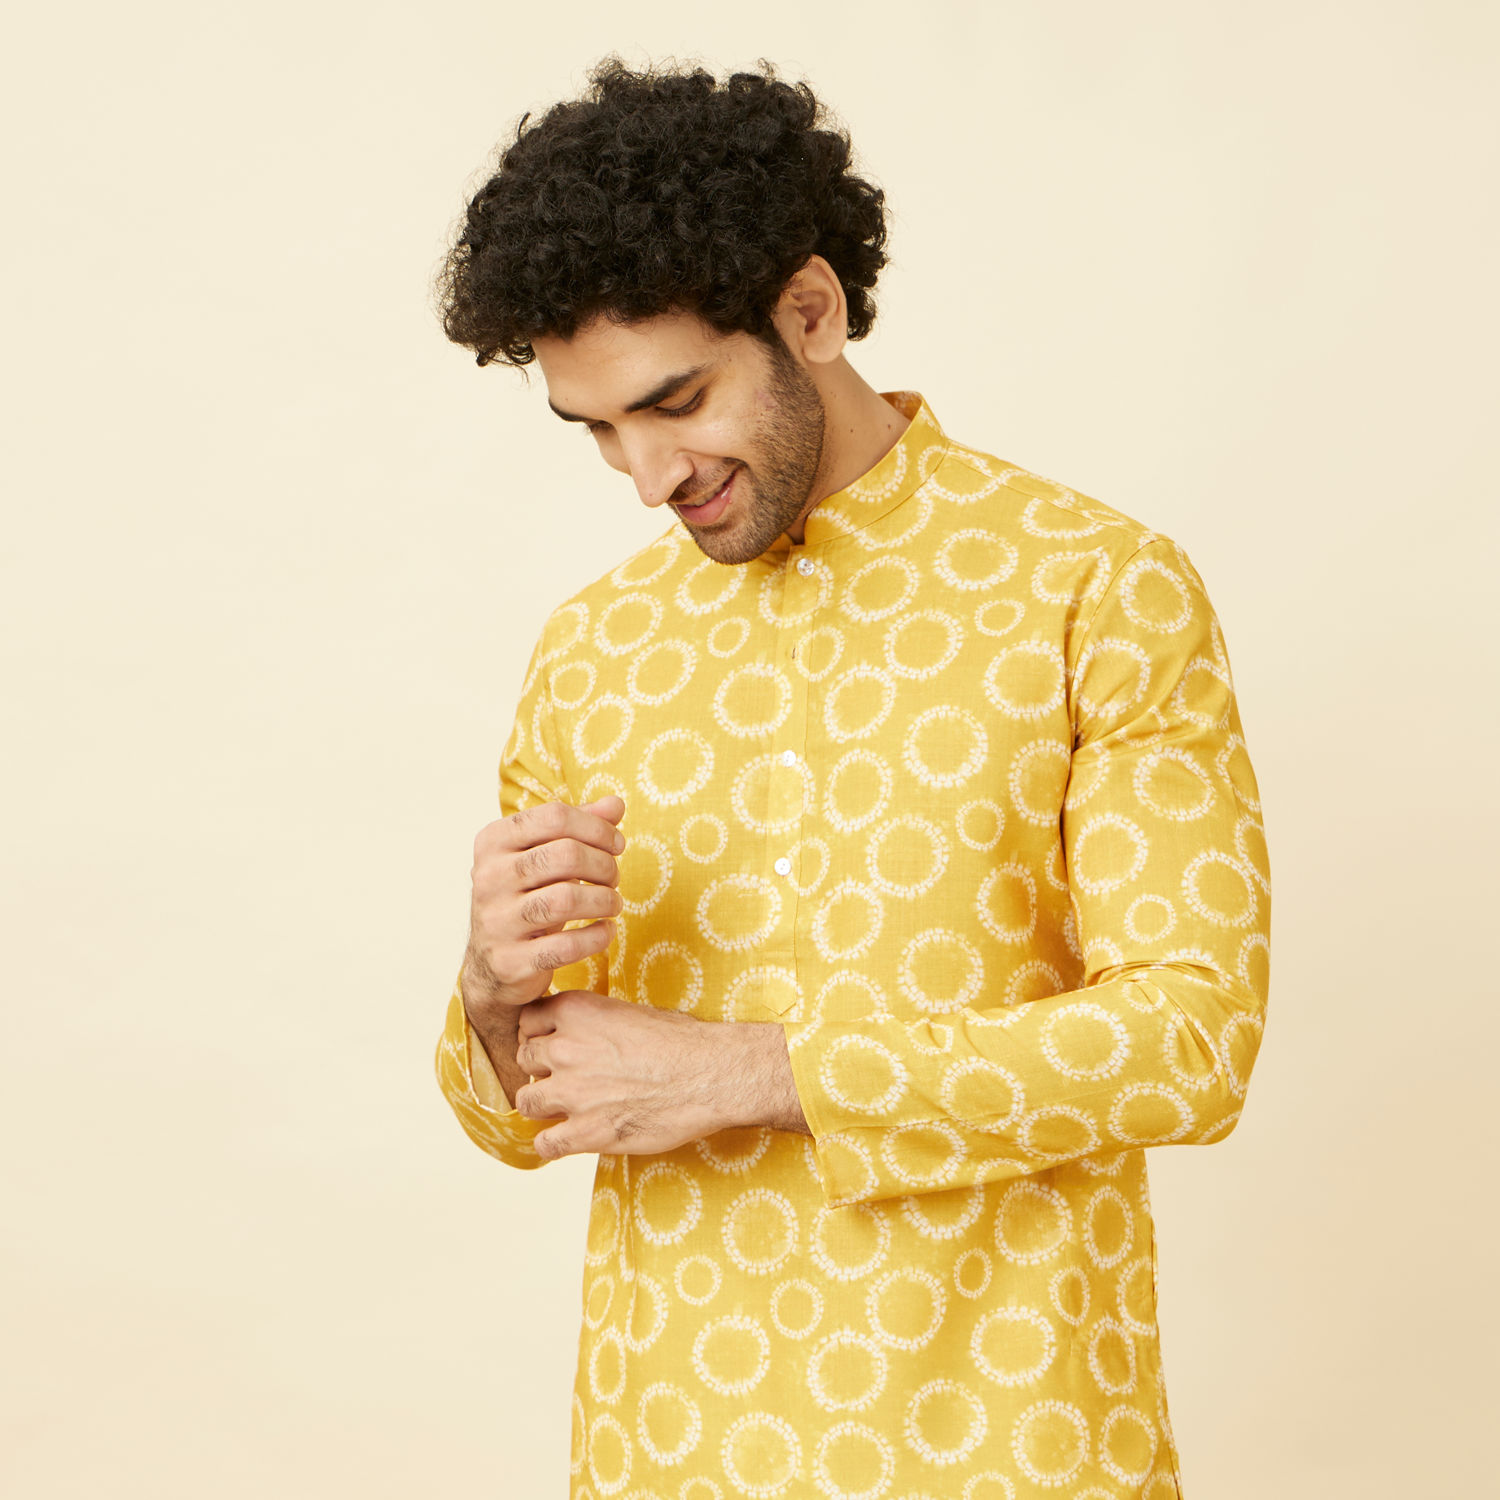 Grab The Attention With These Amazing Haldi Ceremony Outfits | Fashion suits  for men, Indian groom wear, Wedding outfit men